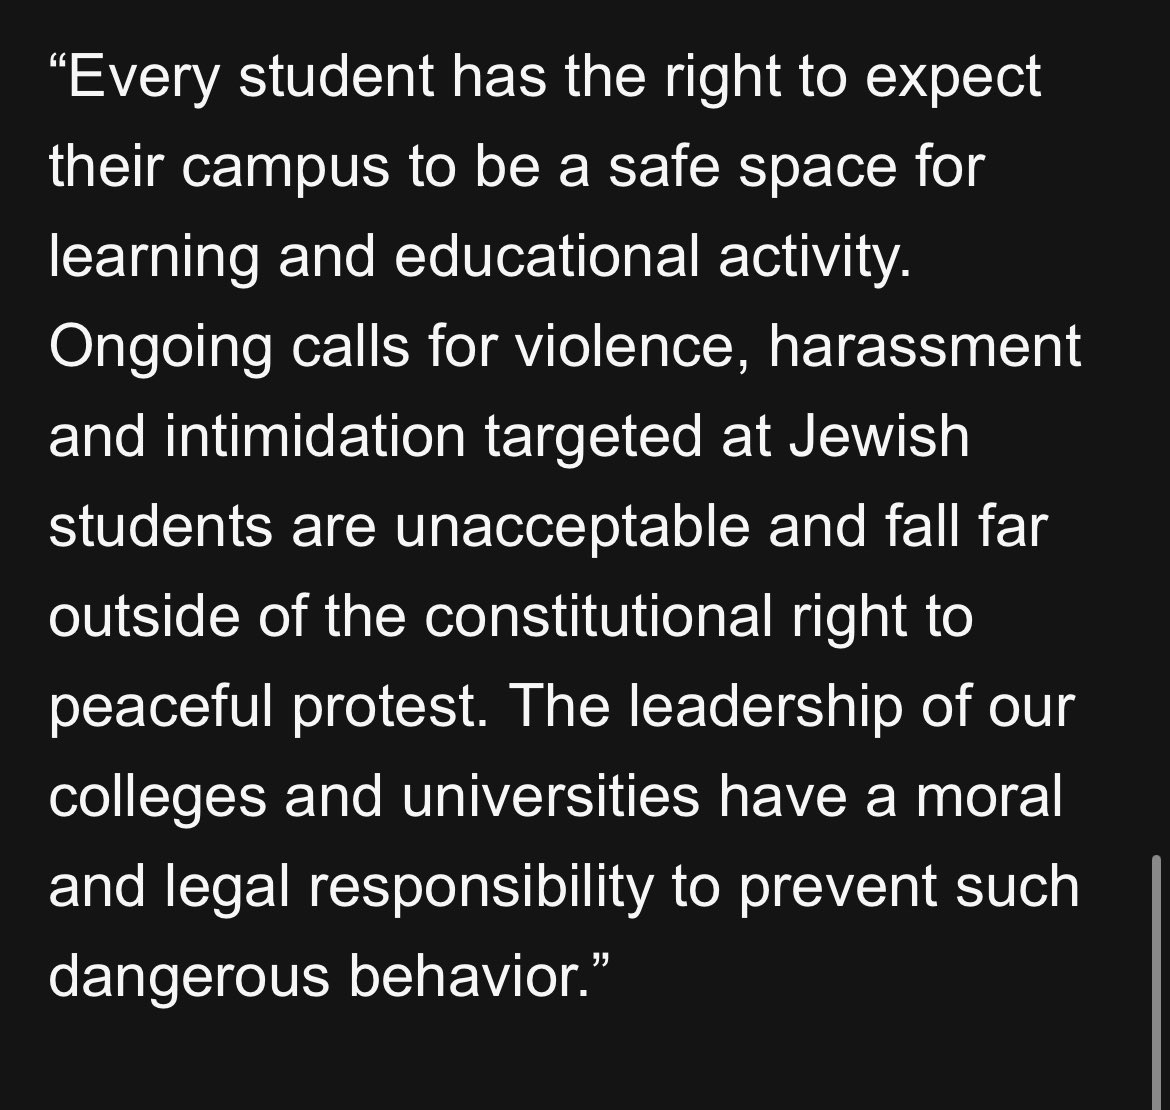 .@SenatorCardin on protests on college campuses - ‘Ongoing calls for violence, harassment and intimidation targeted at Jewish students are unacceptable and fall far outside of the constitutional right to peaceful protest.’ Full statement below - @wbalradio